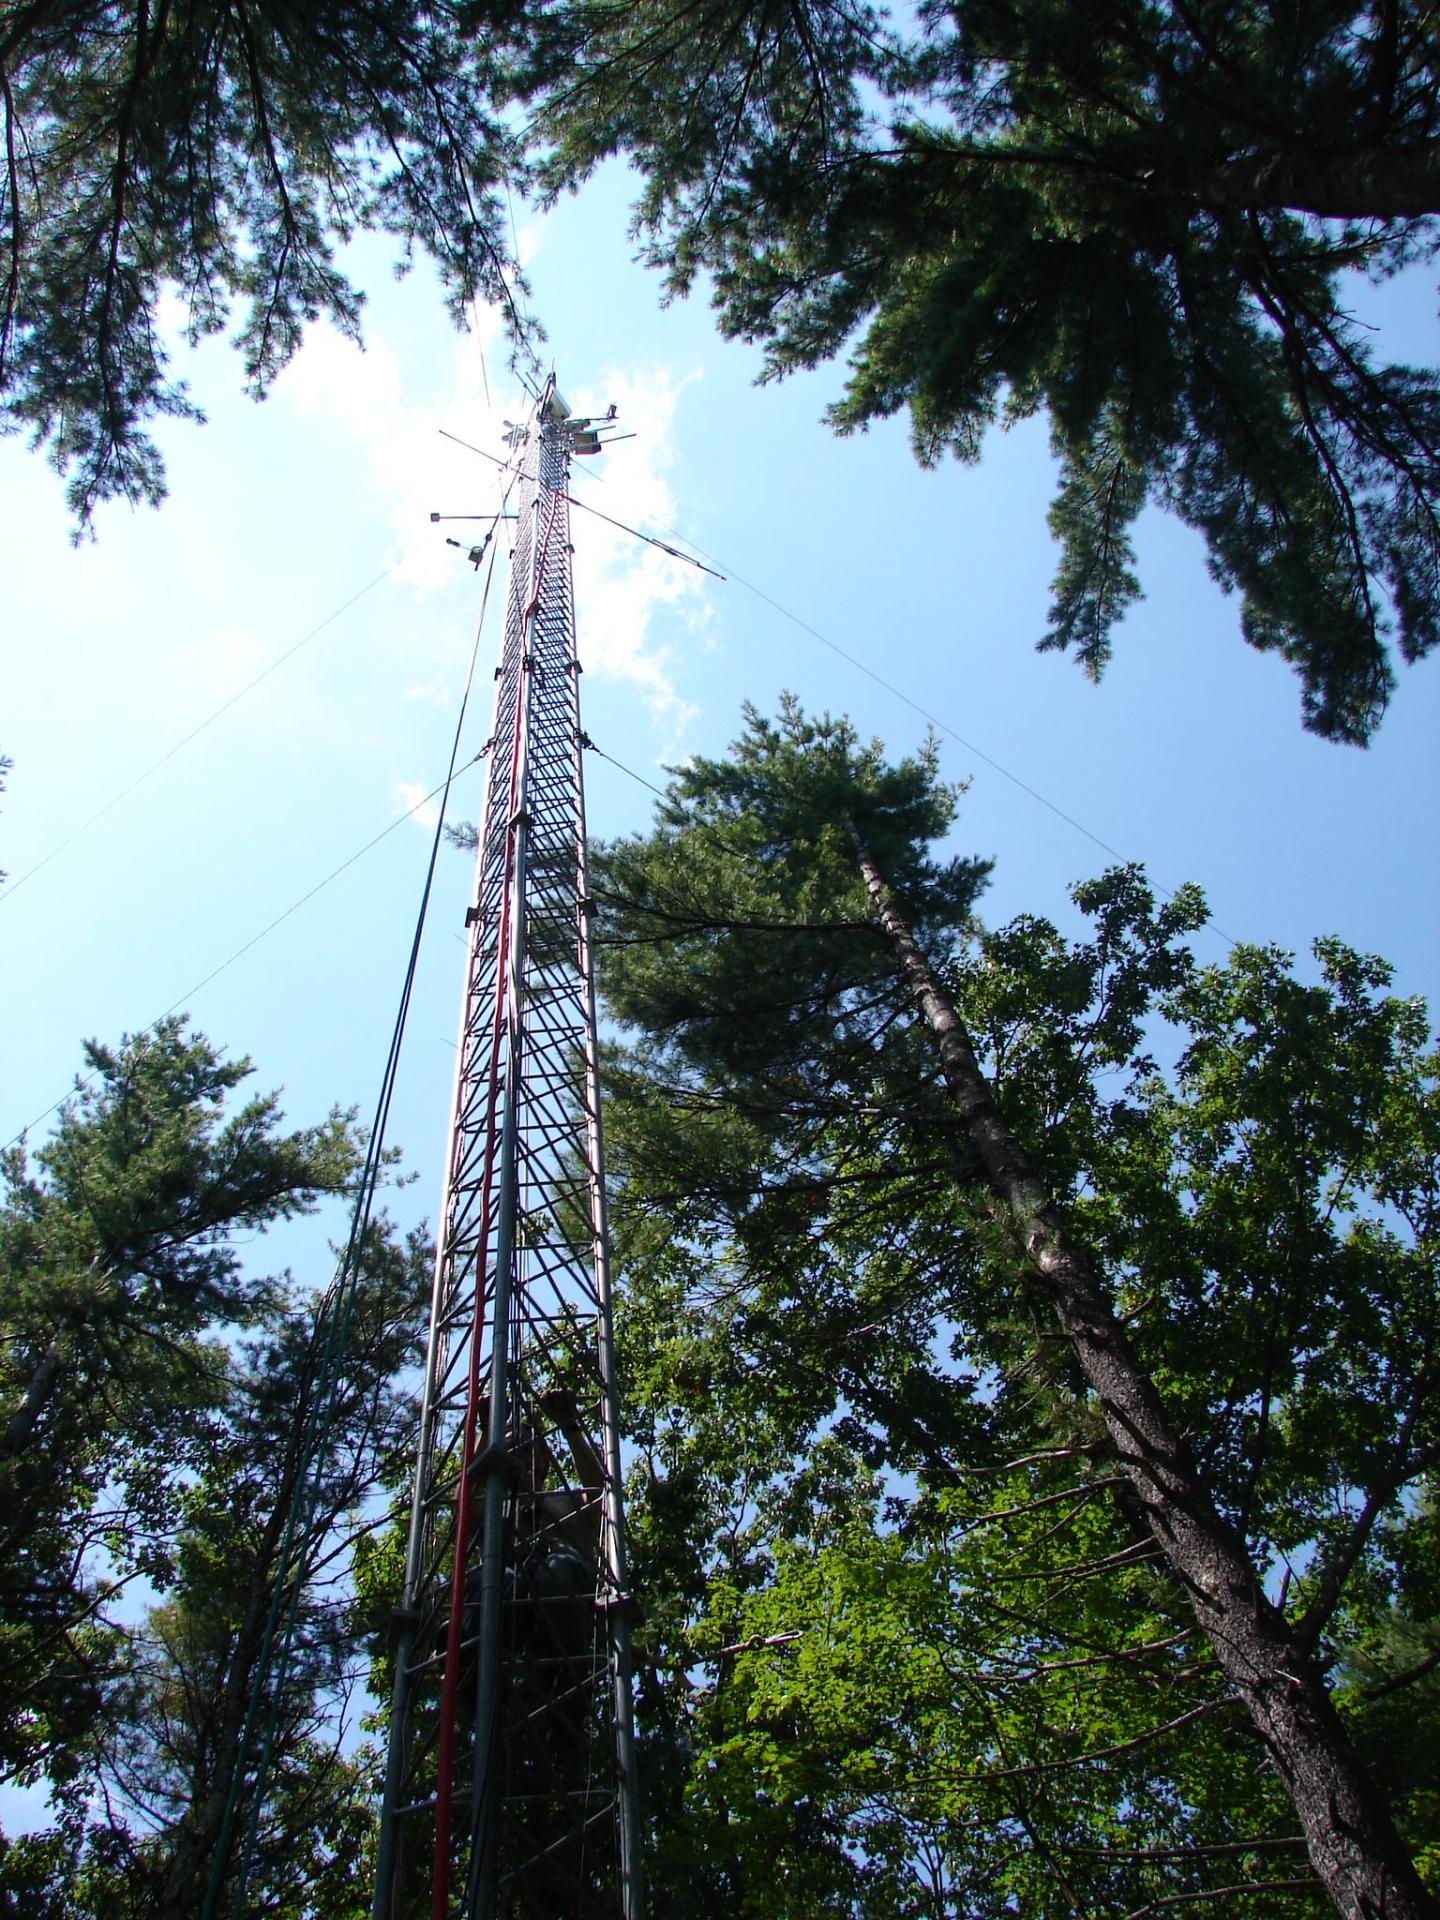 Sensors and Cameras on a Tower in Harvard Forest